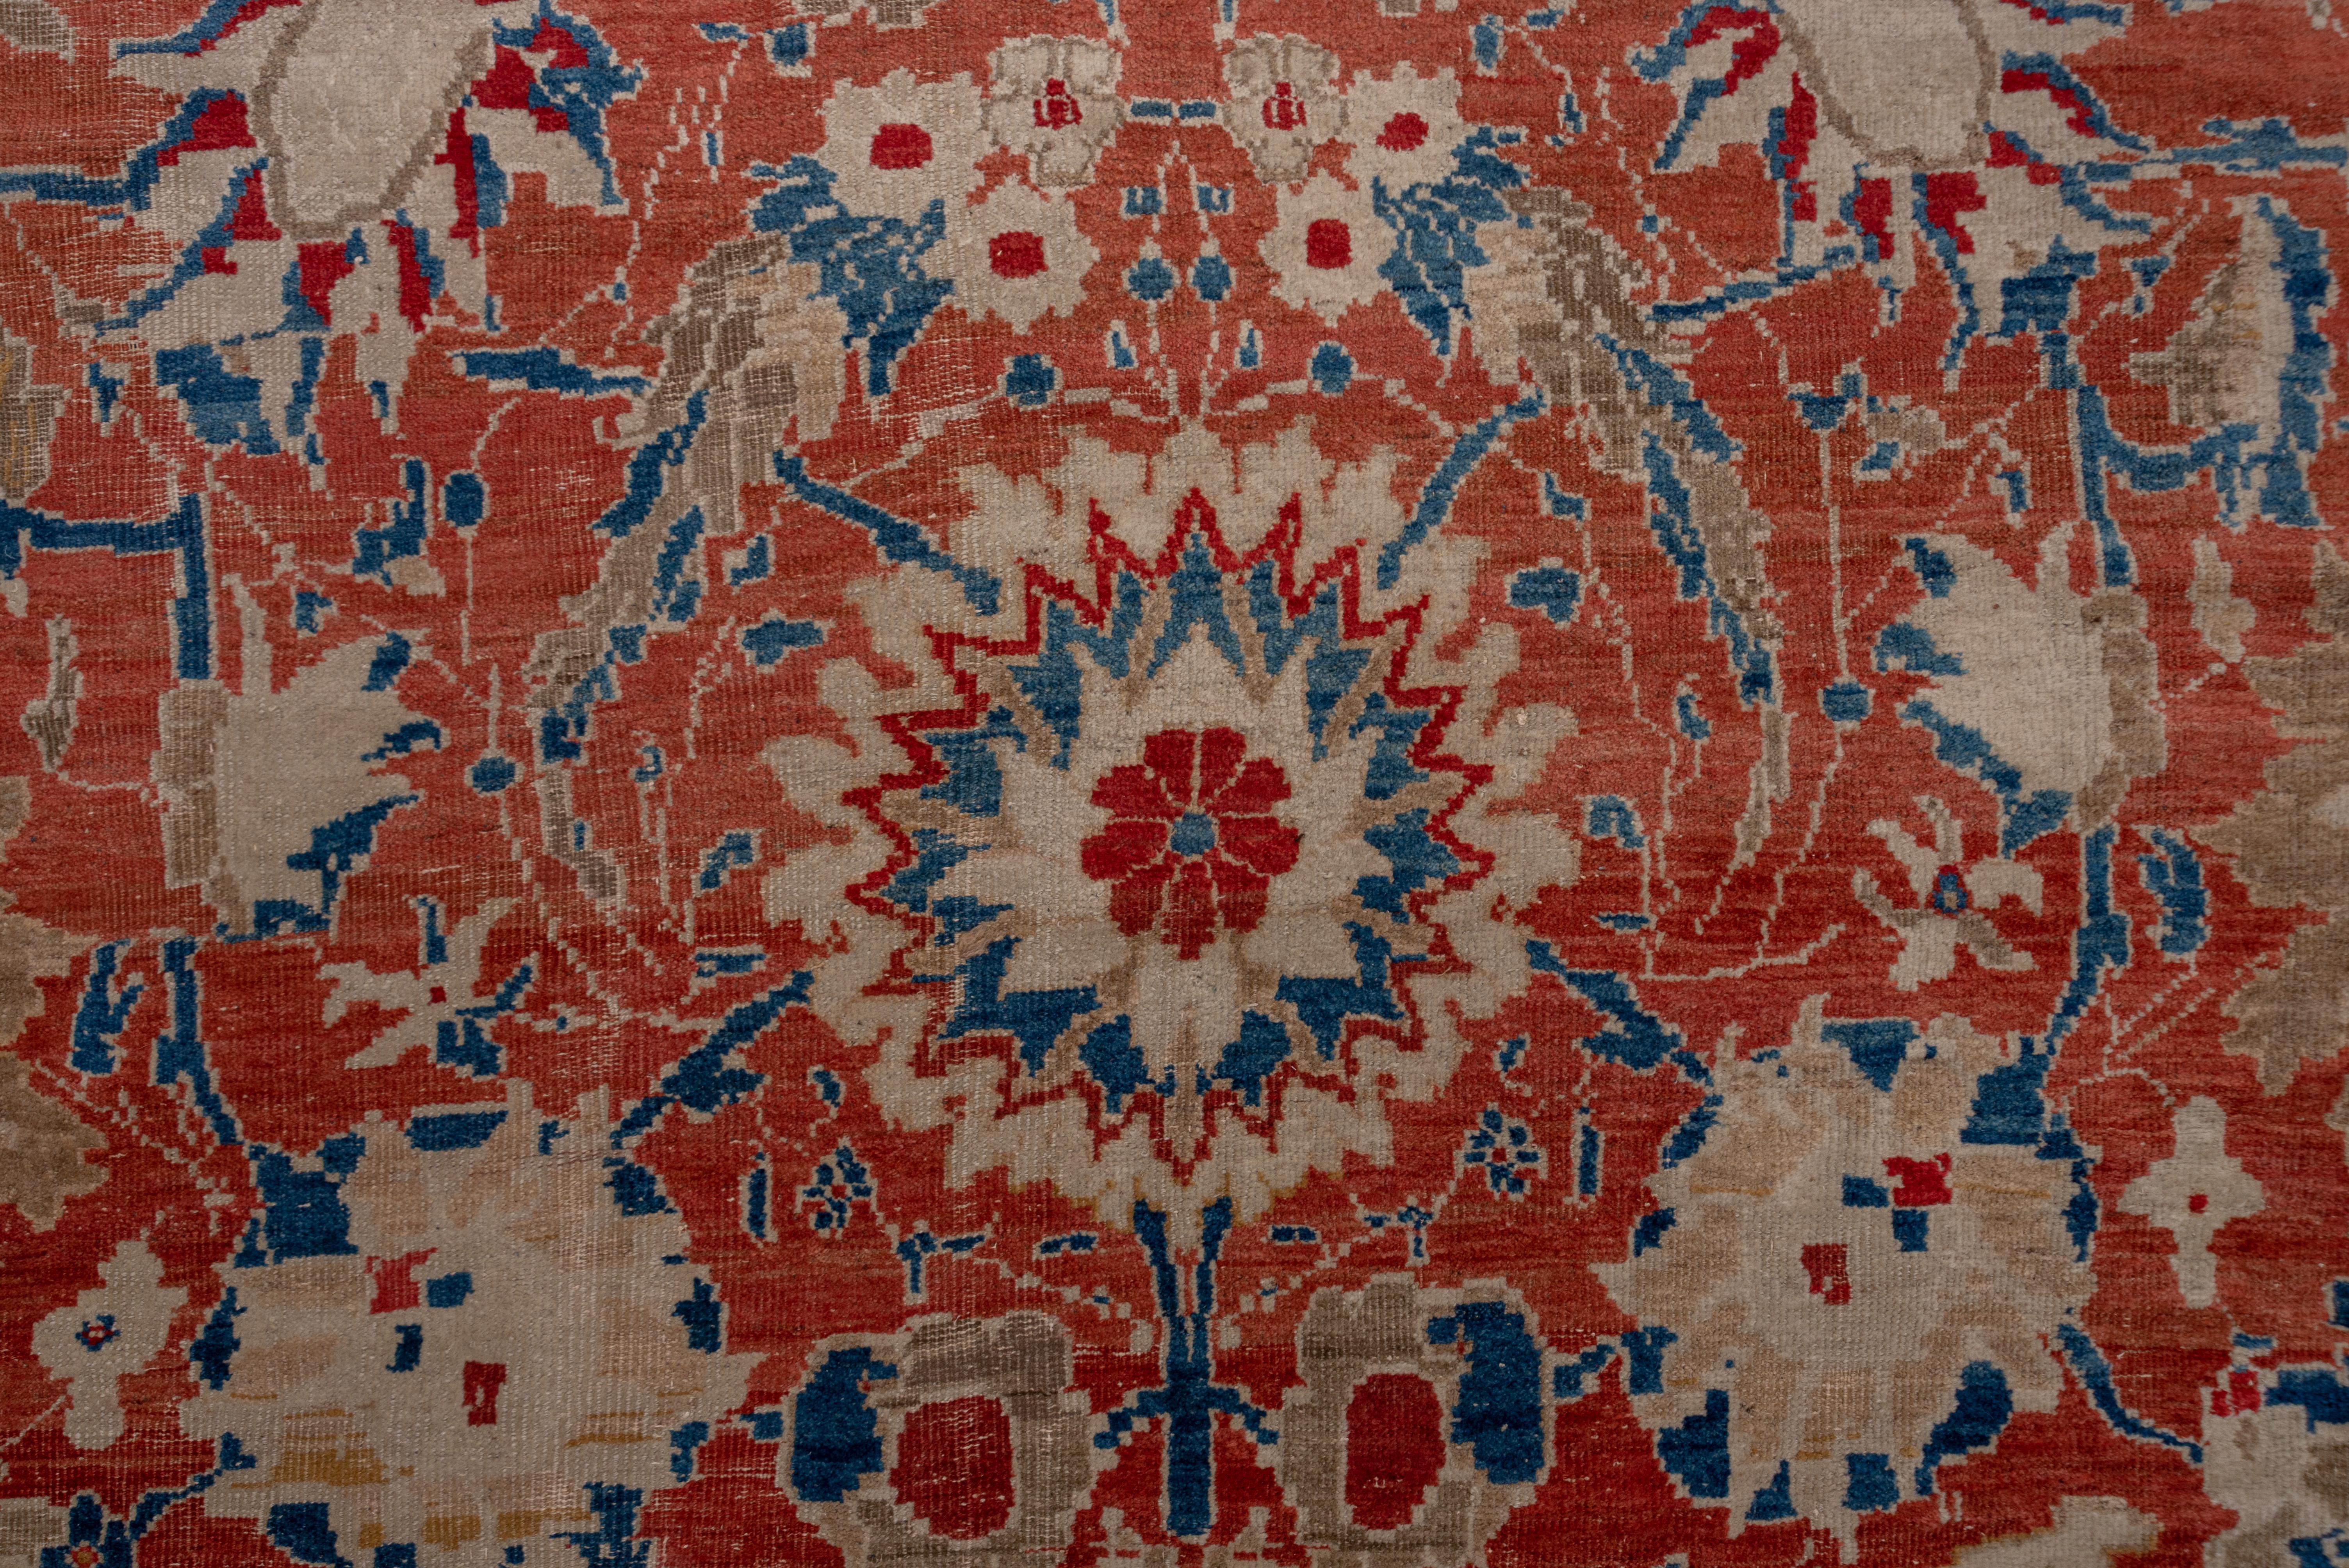 Wool Magnificent Antique Persian Sultanabad Carpet, Bright Orange & Red Allover Field